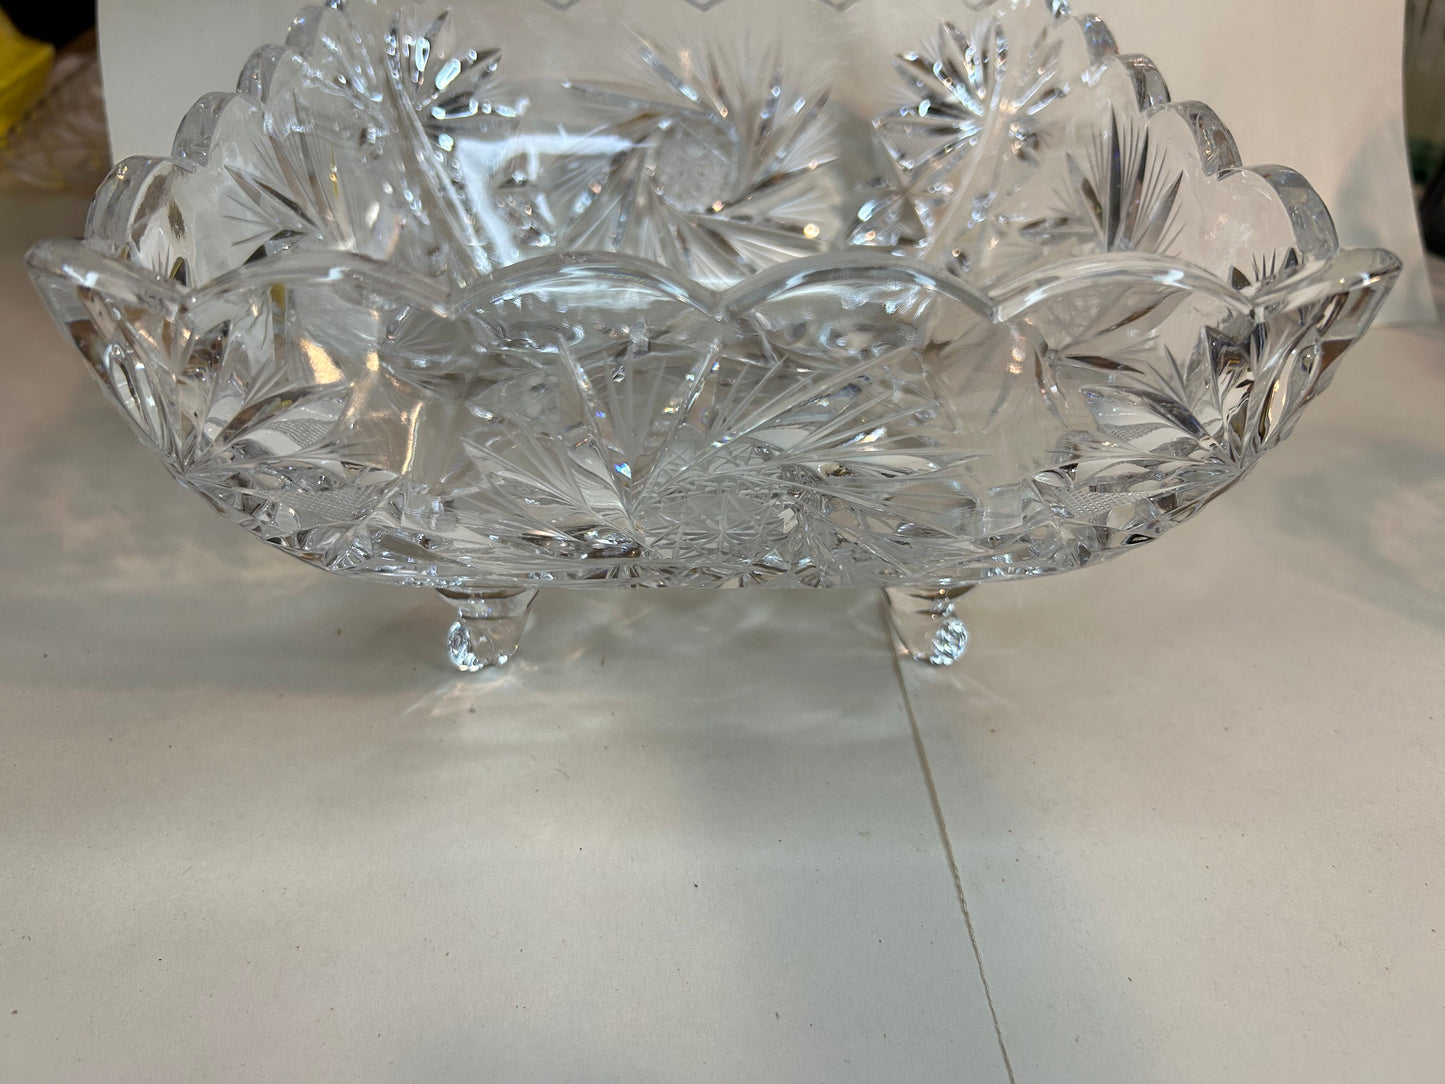 Vintage 1970s Square Crystal Footed BOHEMIAN CZECH Cut Glass Bowl Pinwheels Scalloped Stars